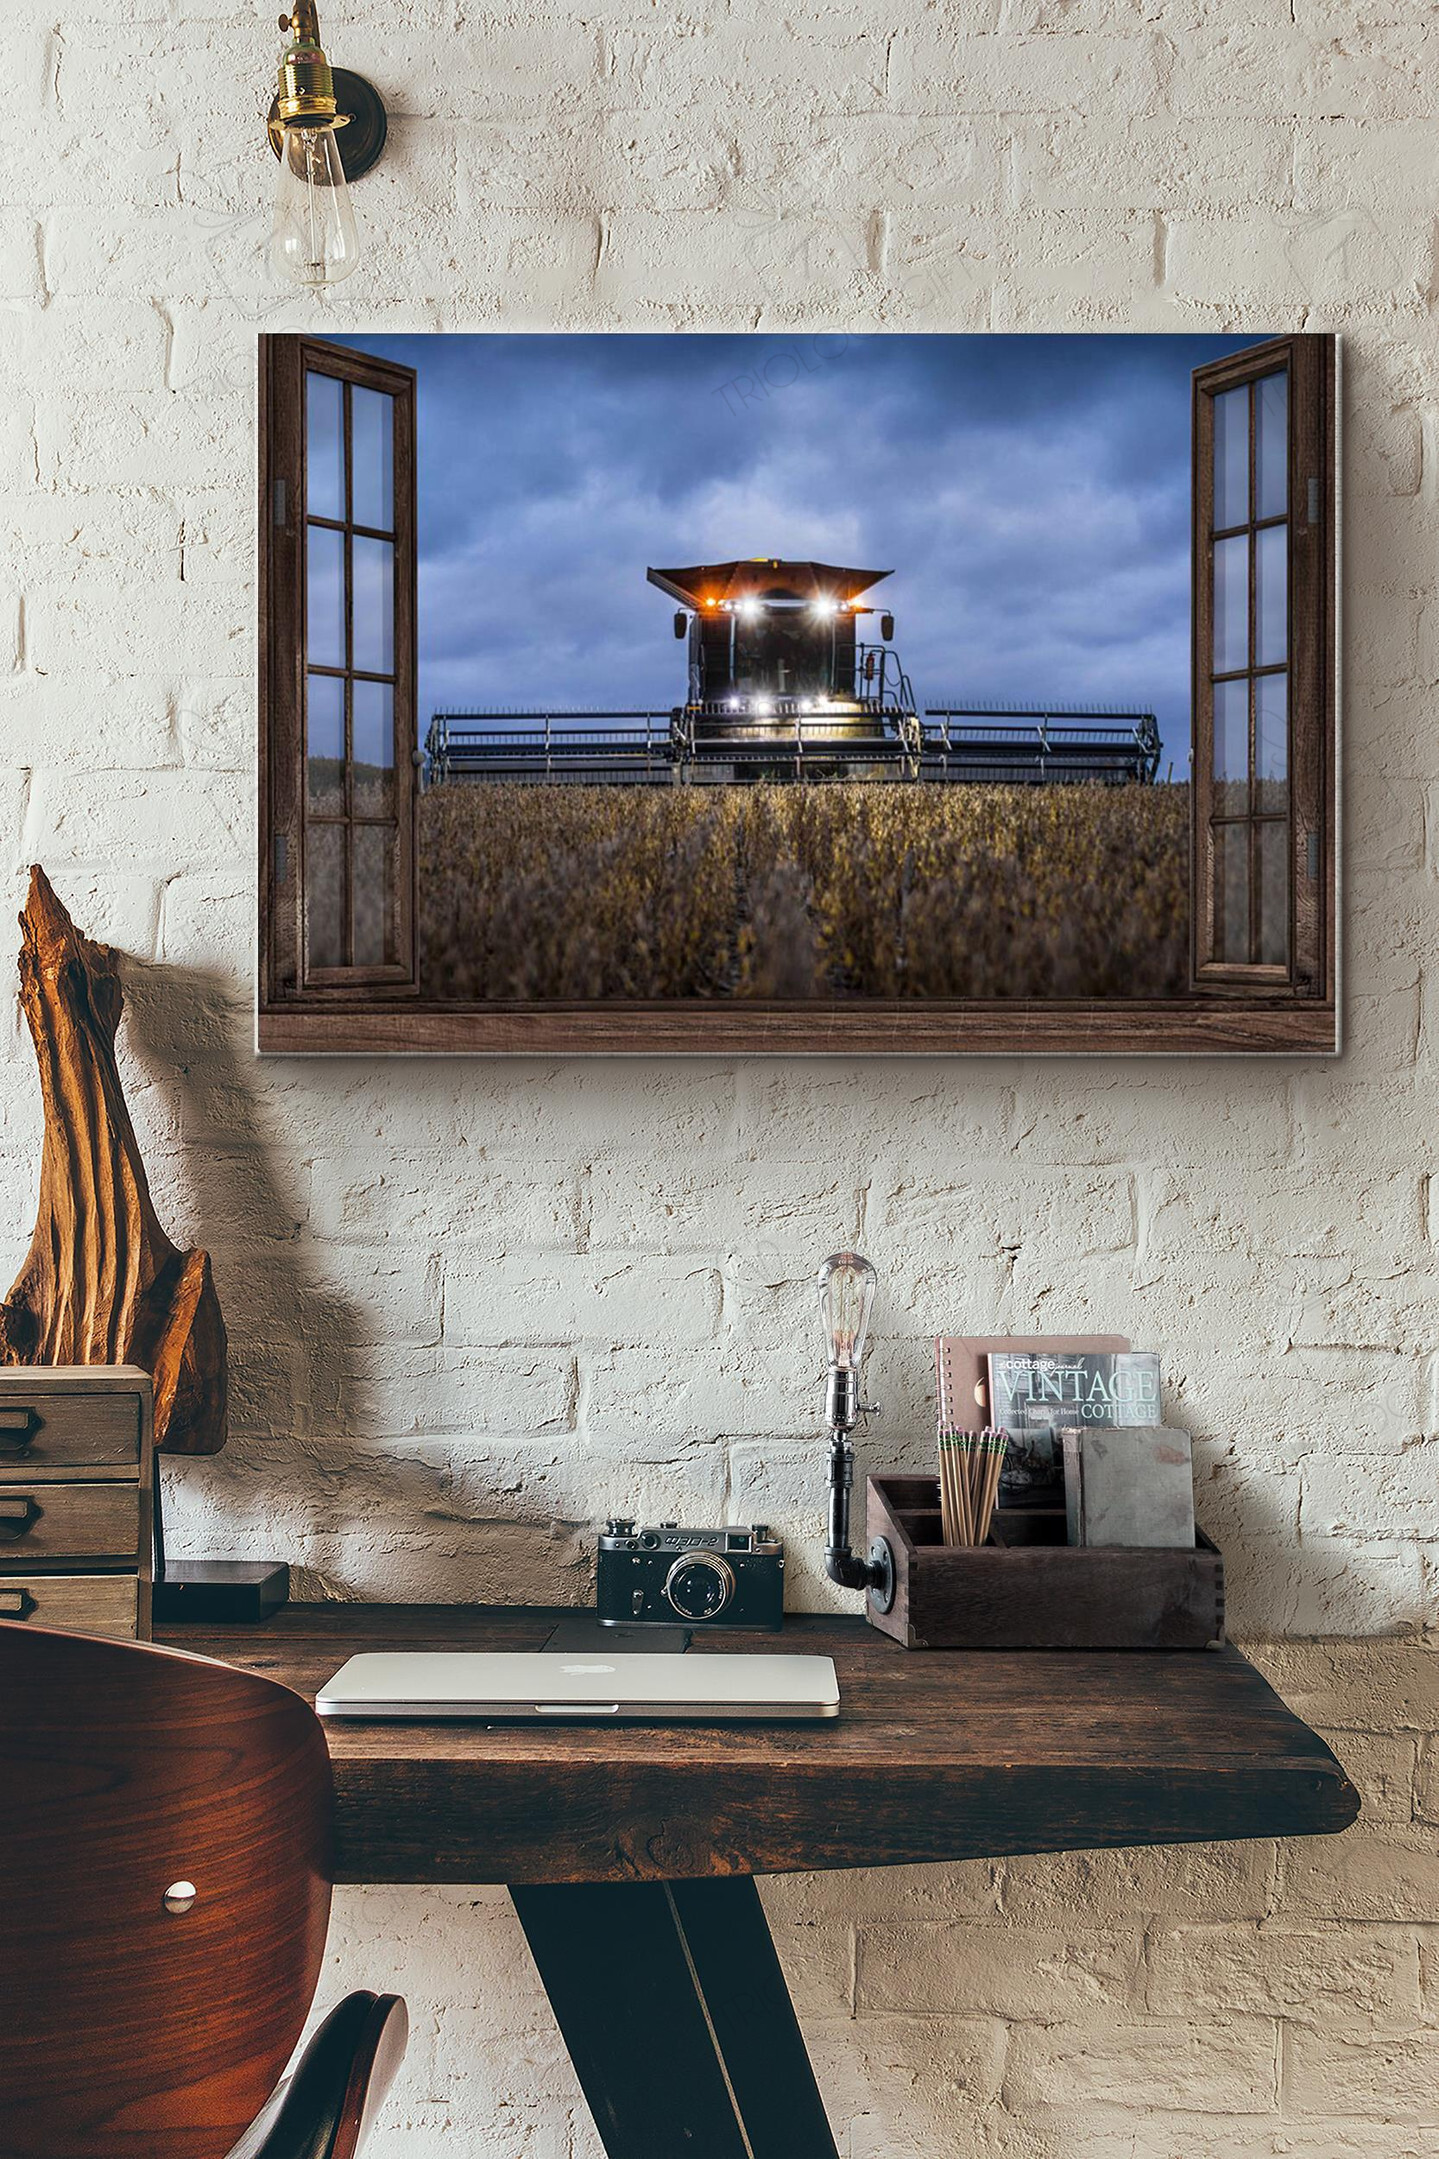 Tractor Window Night View Canvas Painting Ideas, Canvas Hanging Prints, Gift Idea Framed Prints, Canvas Paintings Wrapped Canvas 8x10